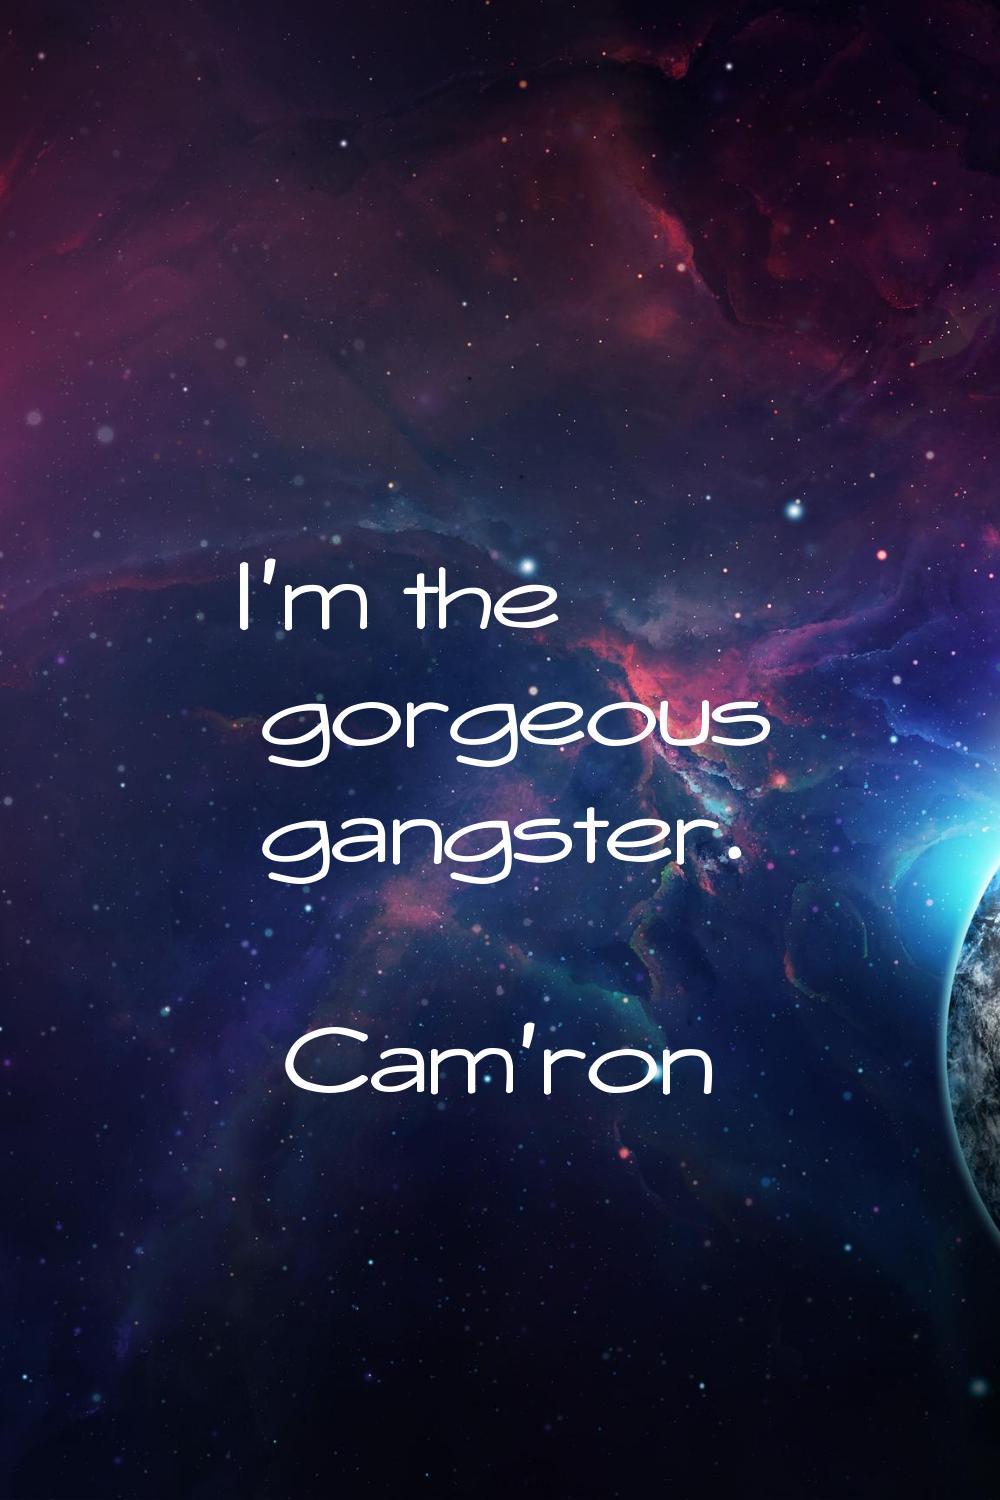 I'm the gorgeous gangster.